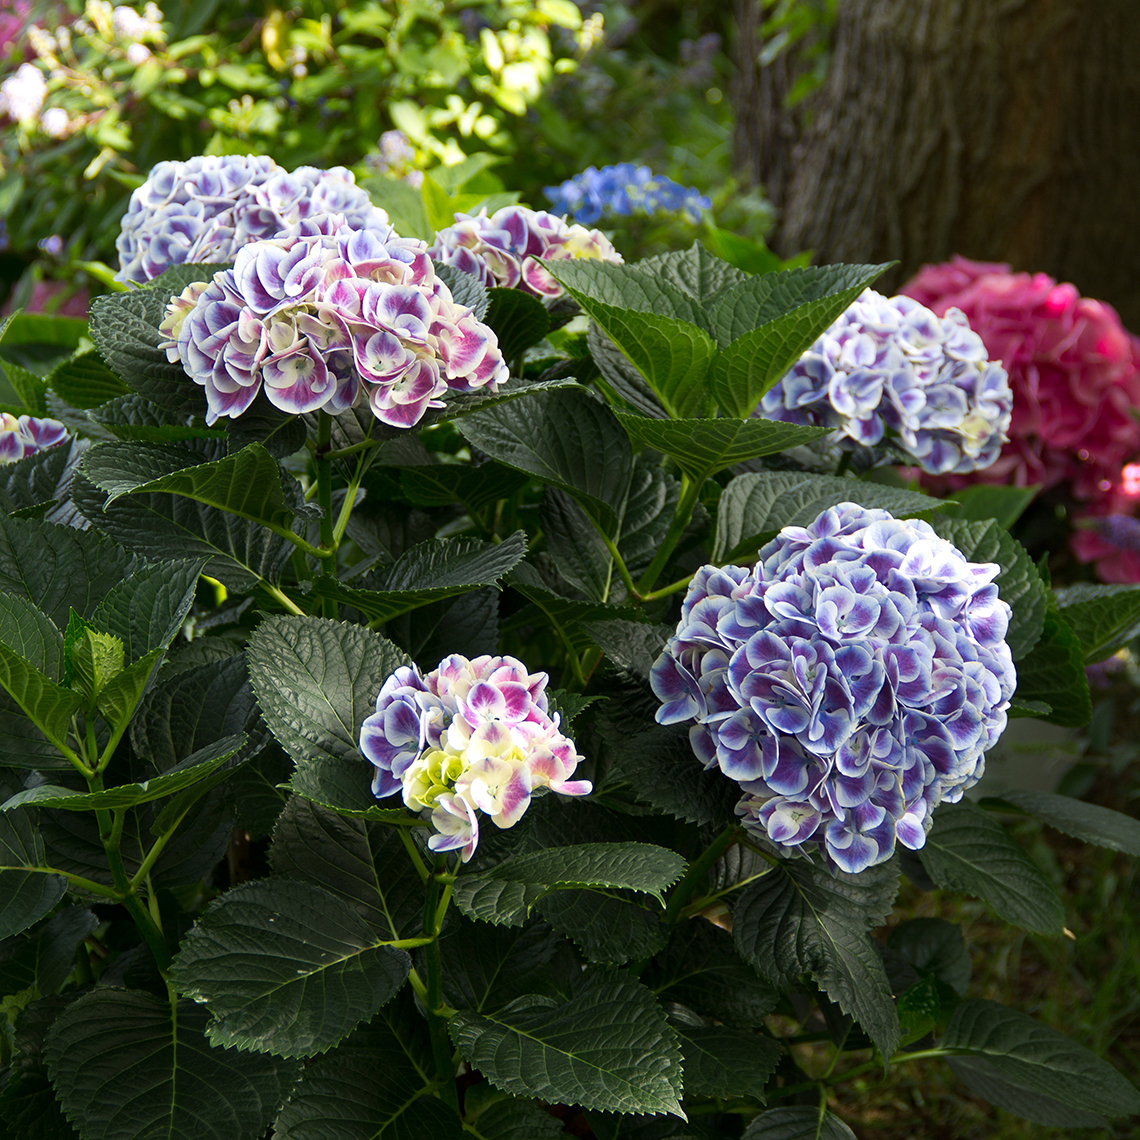 Cityline Mars hydrangea blooming in the landscape showing its unique two toned blooms which are blue and white